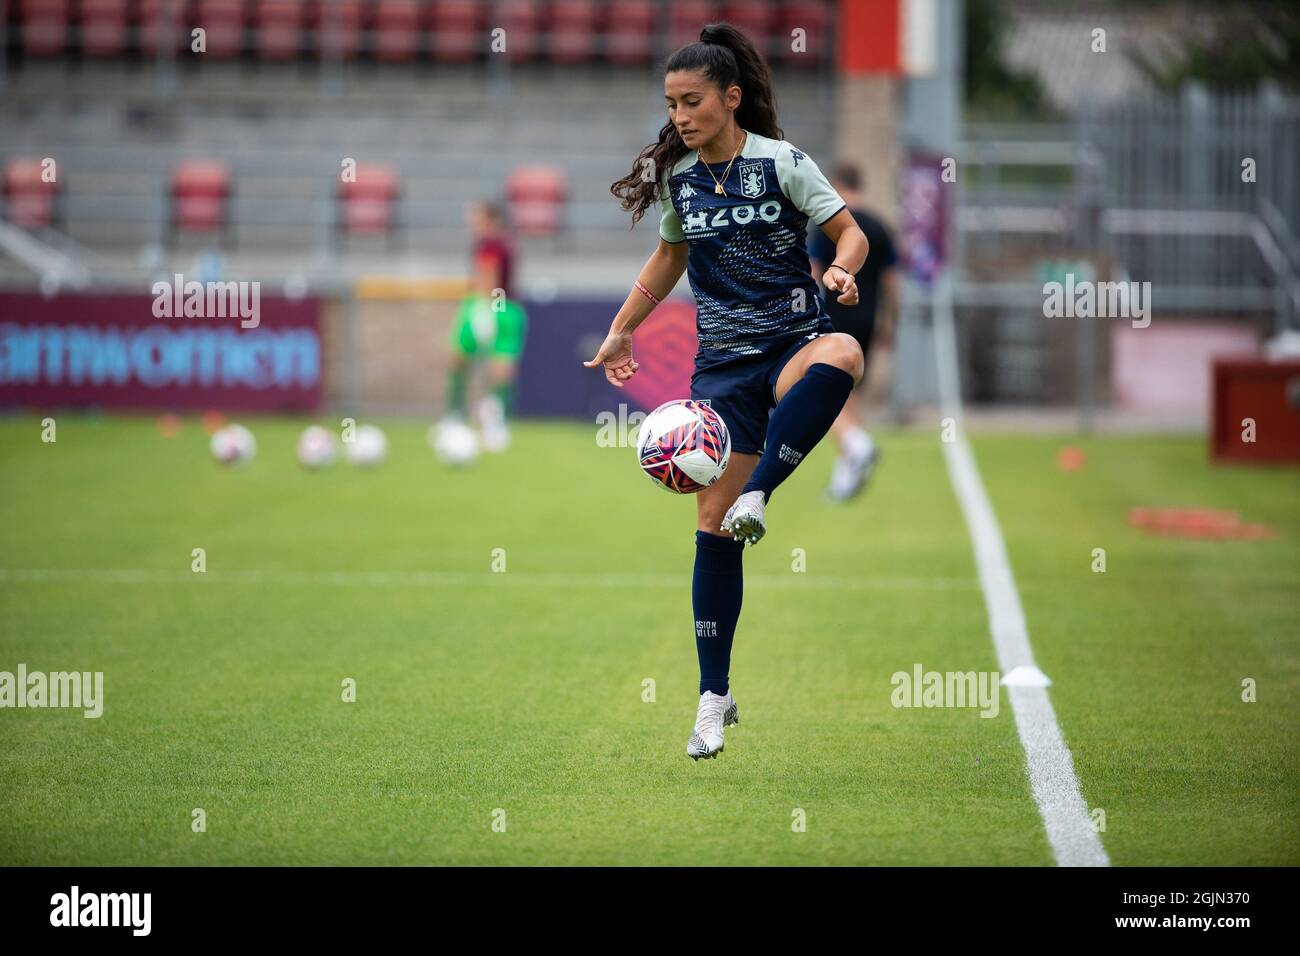 London, UK. 11th September, 2021. Aston Villa’s Mayumi Pacheco ahead of the Barclay’s FA WSL fixture against West Ham at the Chigwell Construction Stadium. Credit: Liam Asman/Alamy Live News Stock Photo